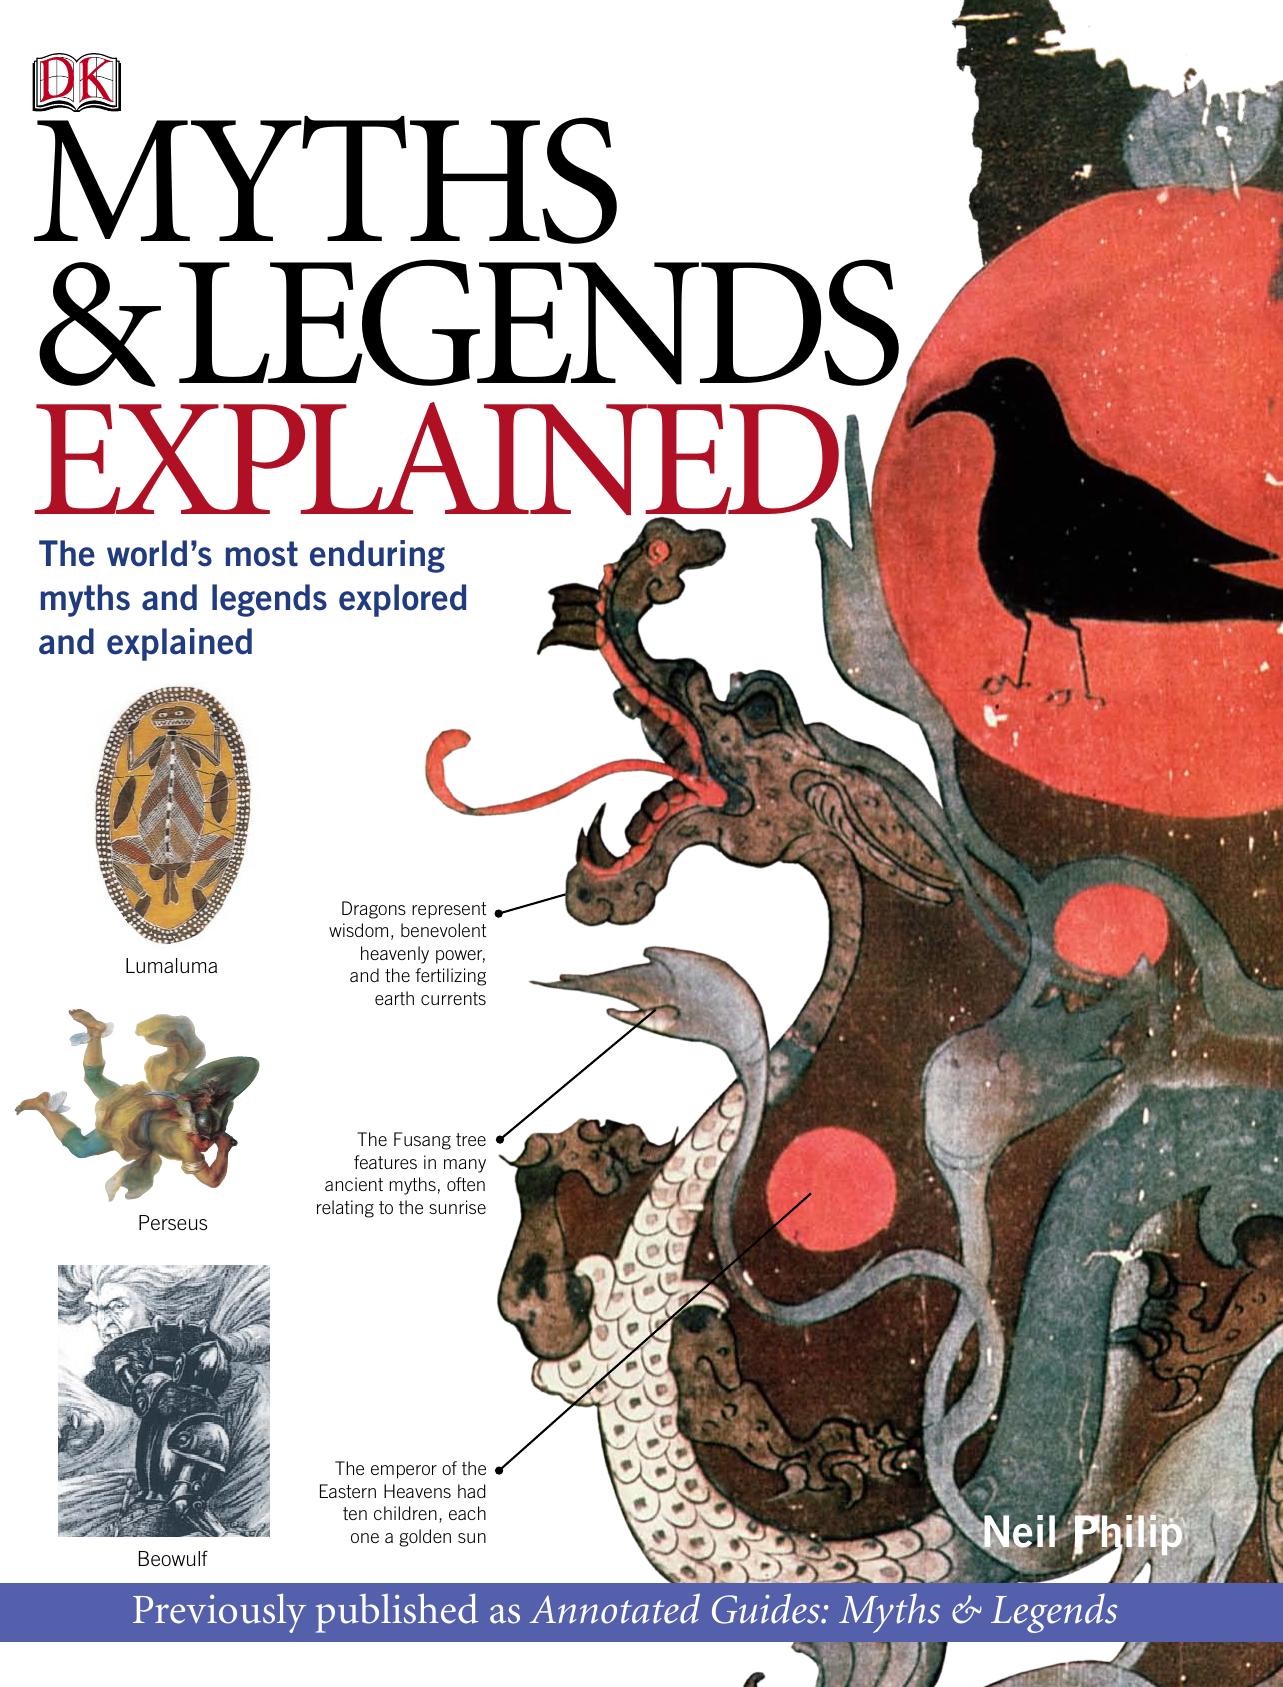 Myths and Legends Explained The World's Most Enduring Myths & Legends Explored & Explained